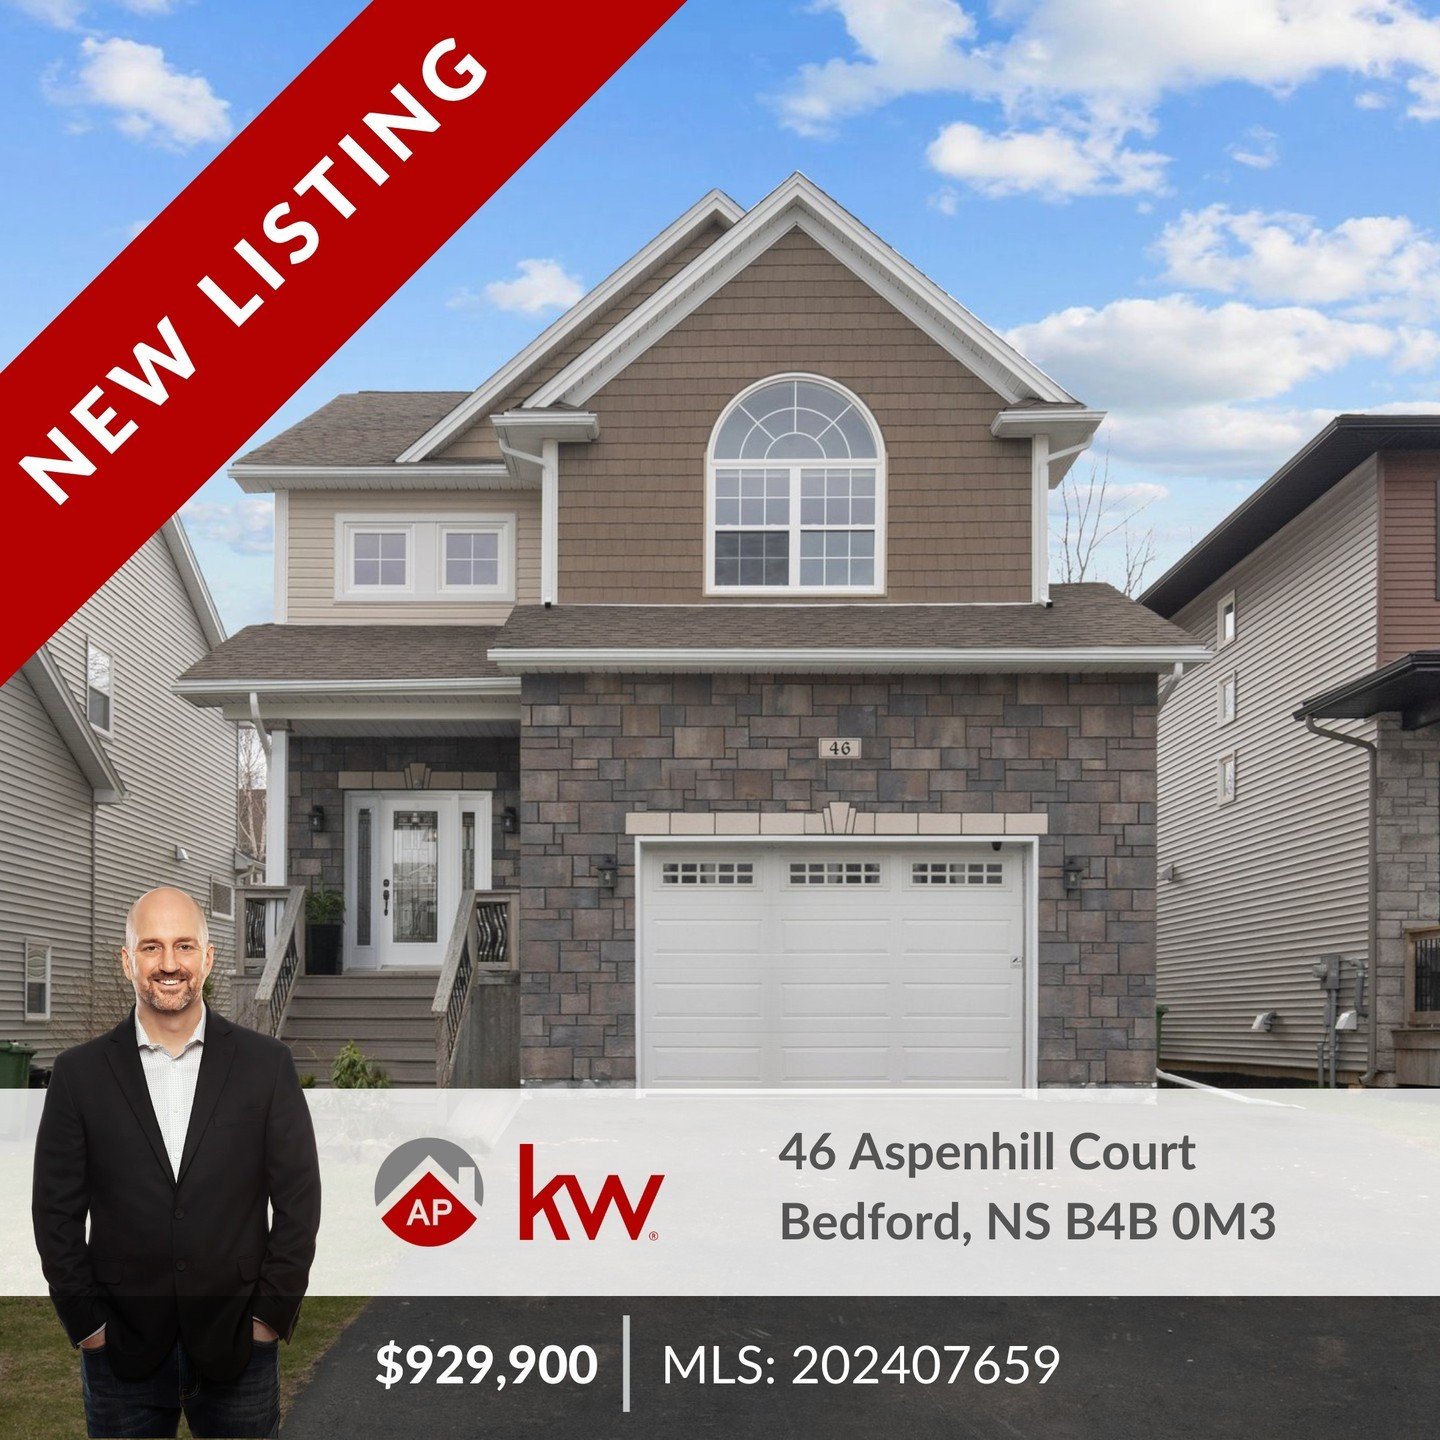 New Listing Alert! 🚨

Welcome to 46 Aspenhill Court!

Nestled in the Parks of West Bedford, this craftsman-style home embodies functionality, boasting 4 bedrooms, 3.5 bathrooms, and an attached garage, all situated on a quiet cul-de-sac. Ideal for f